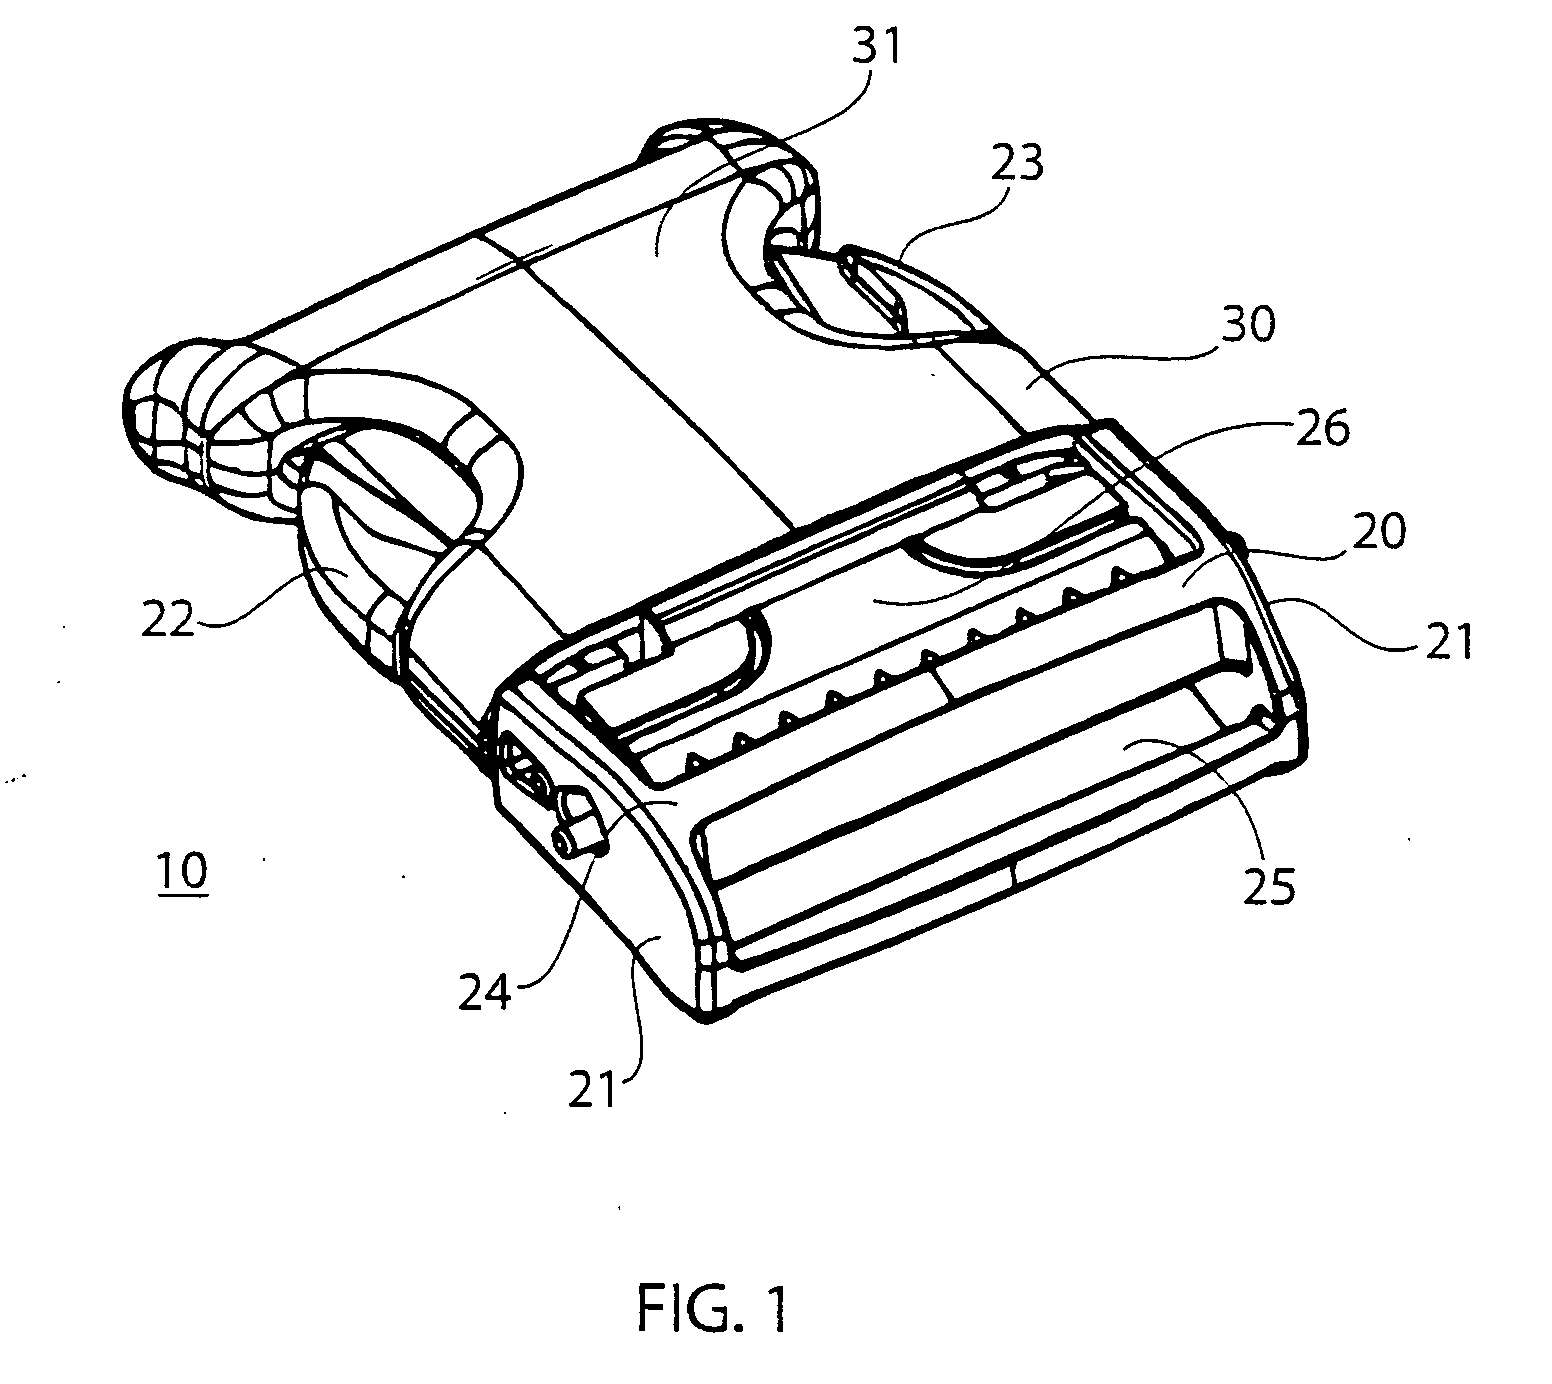 Buckle with strap securing bar